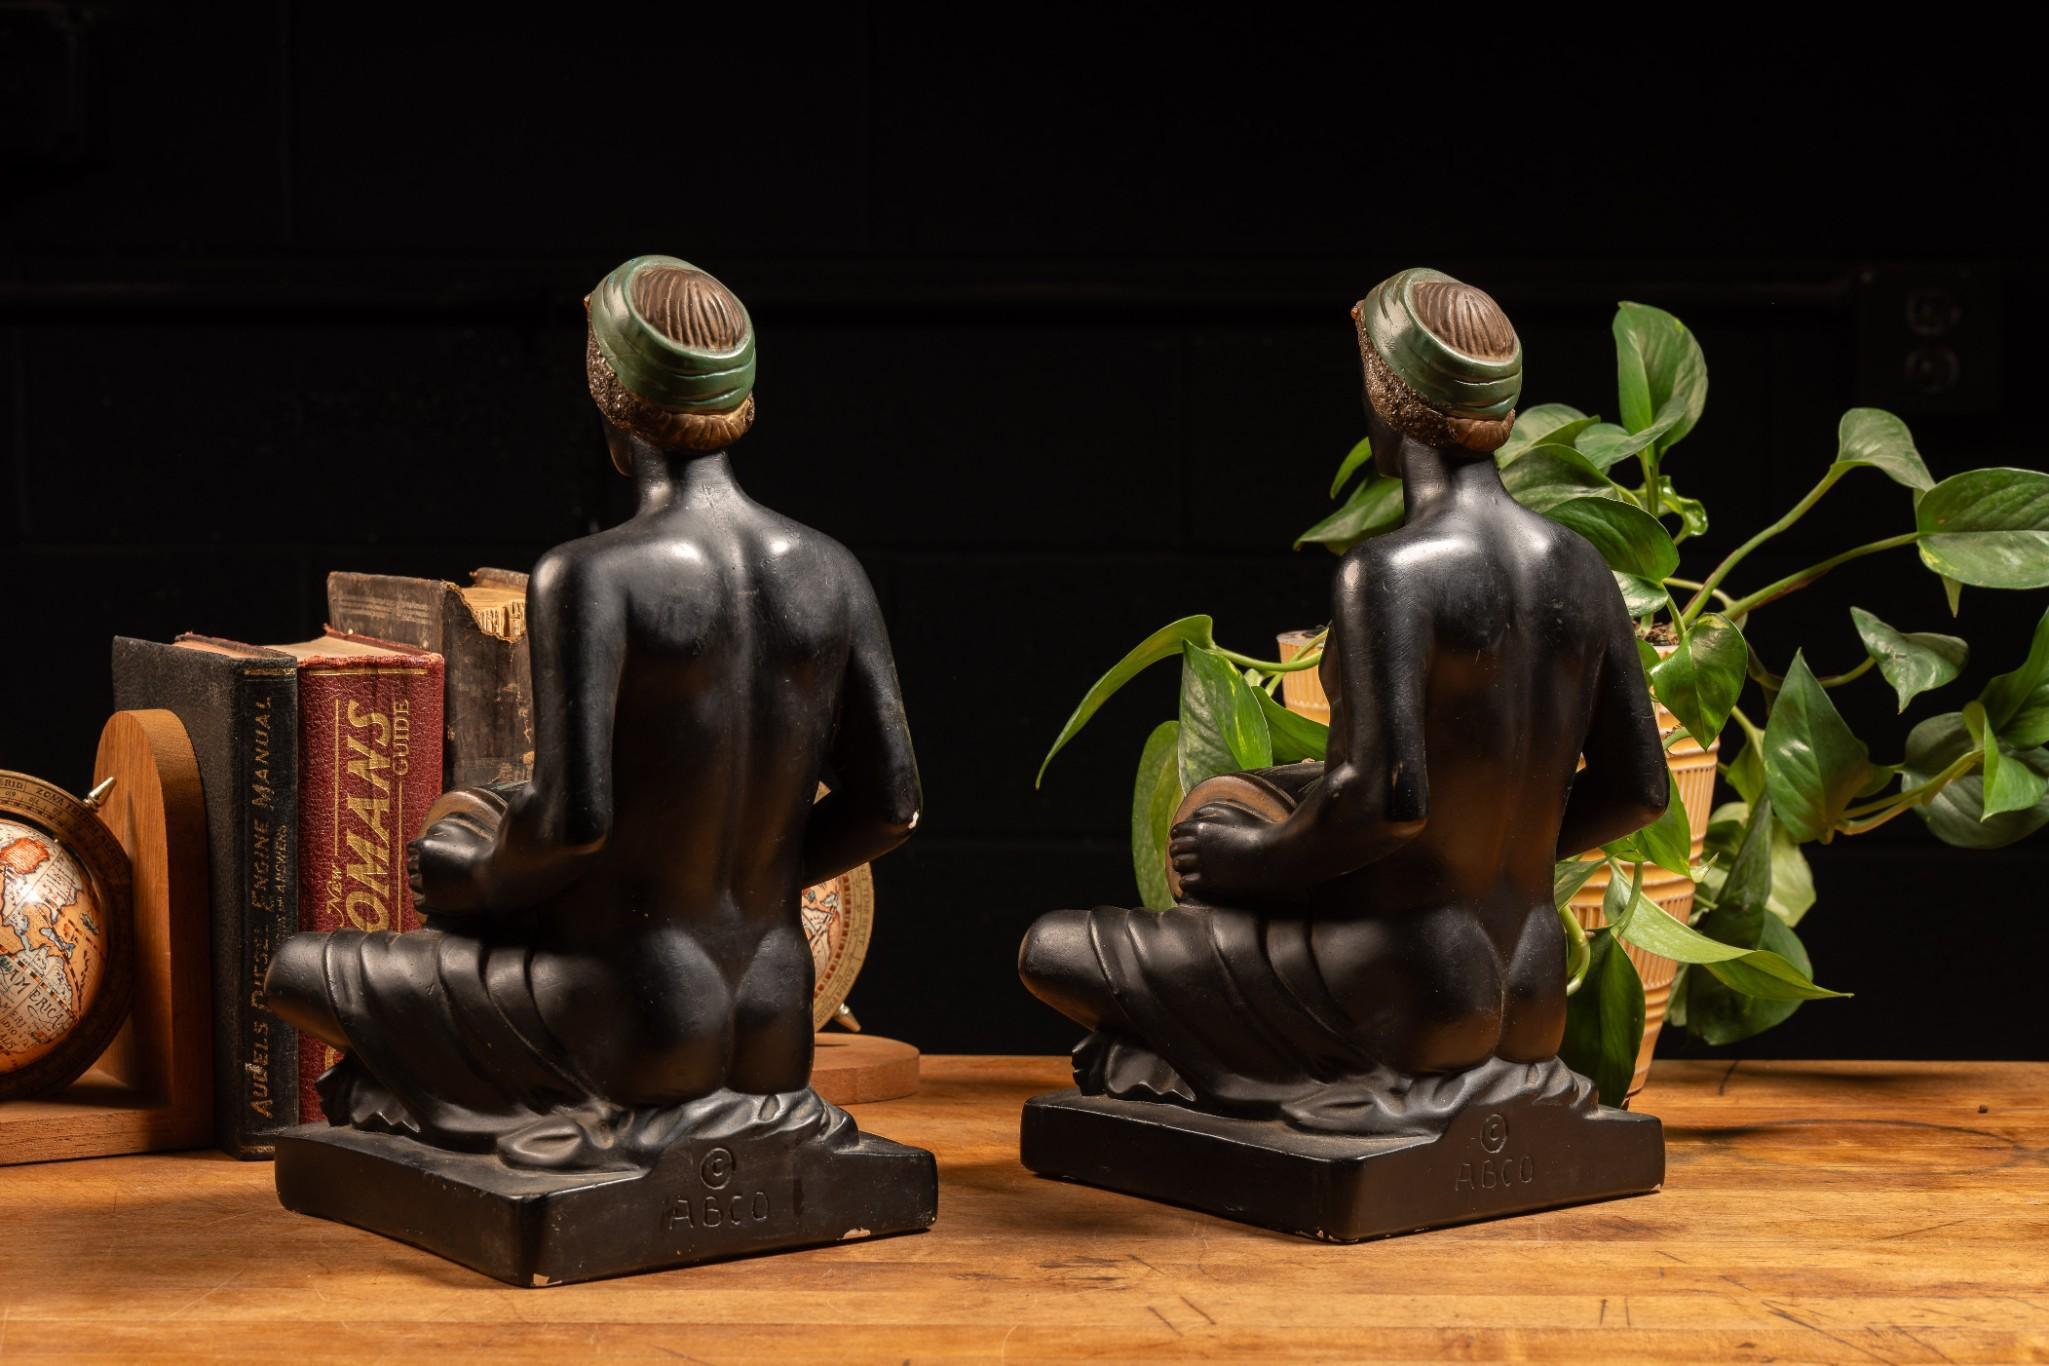 Pair of Sitting Nubian Man Sculptures by ABCO